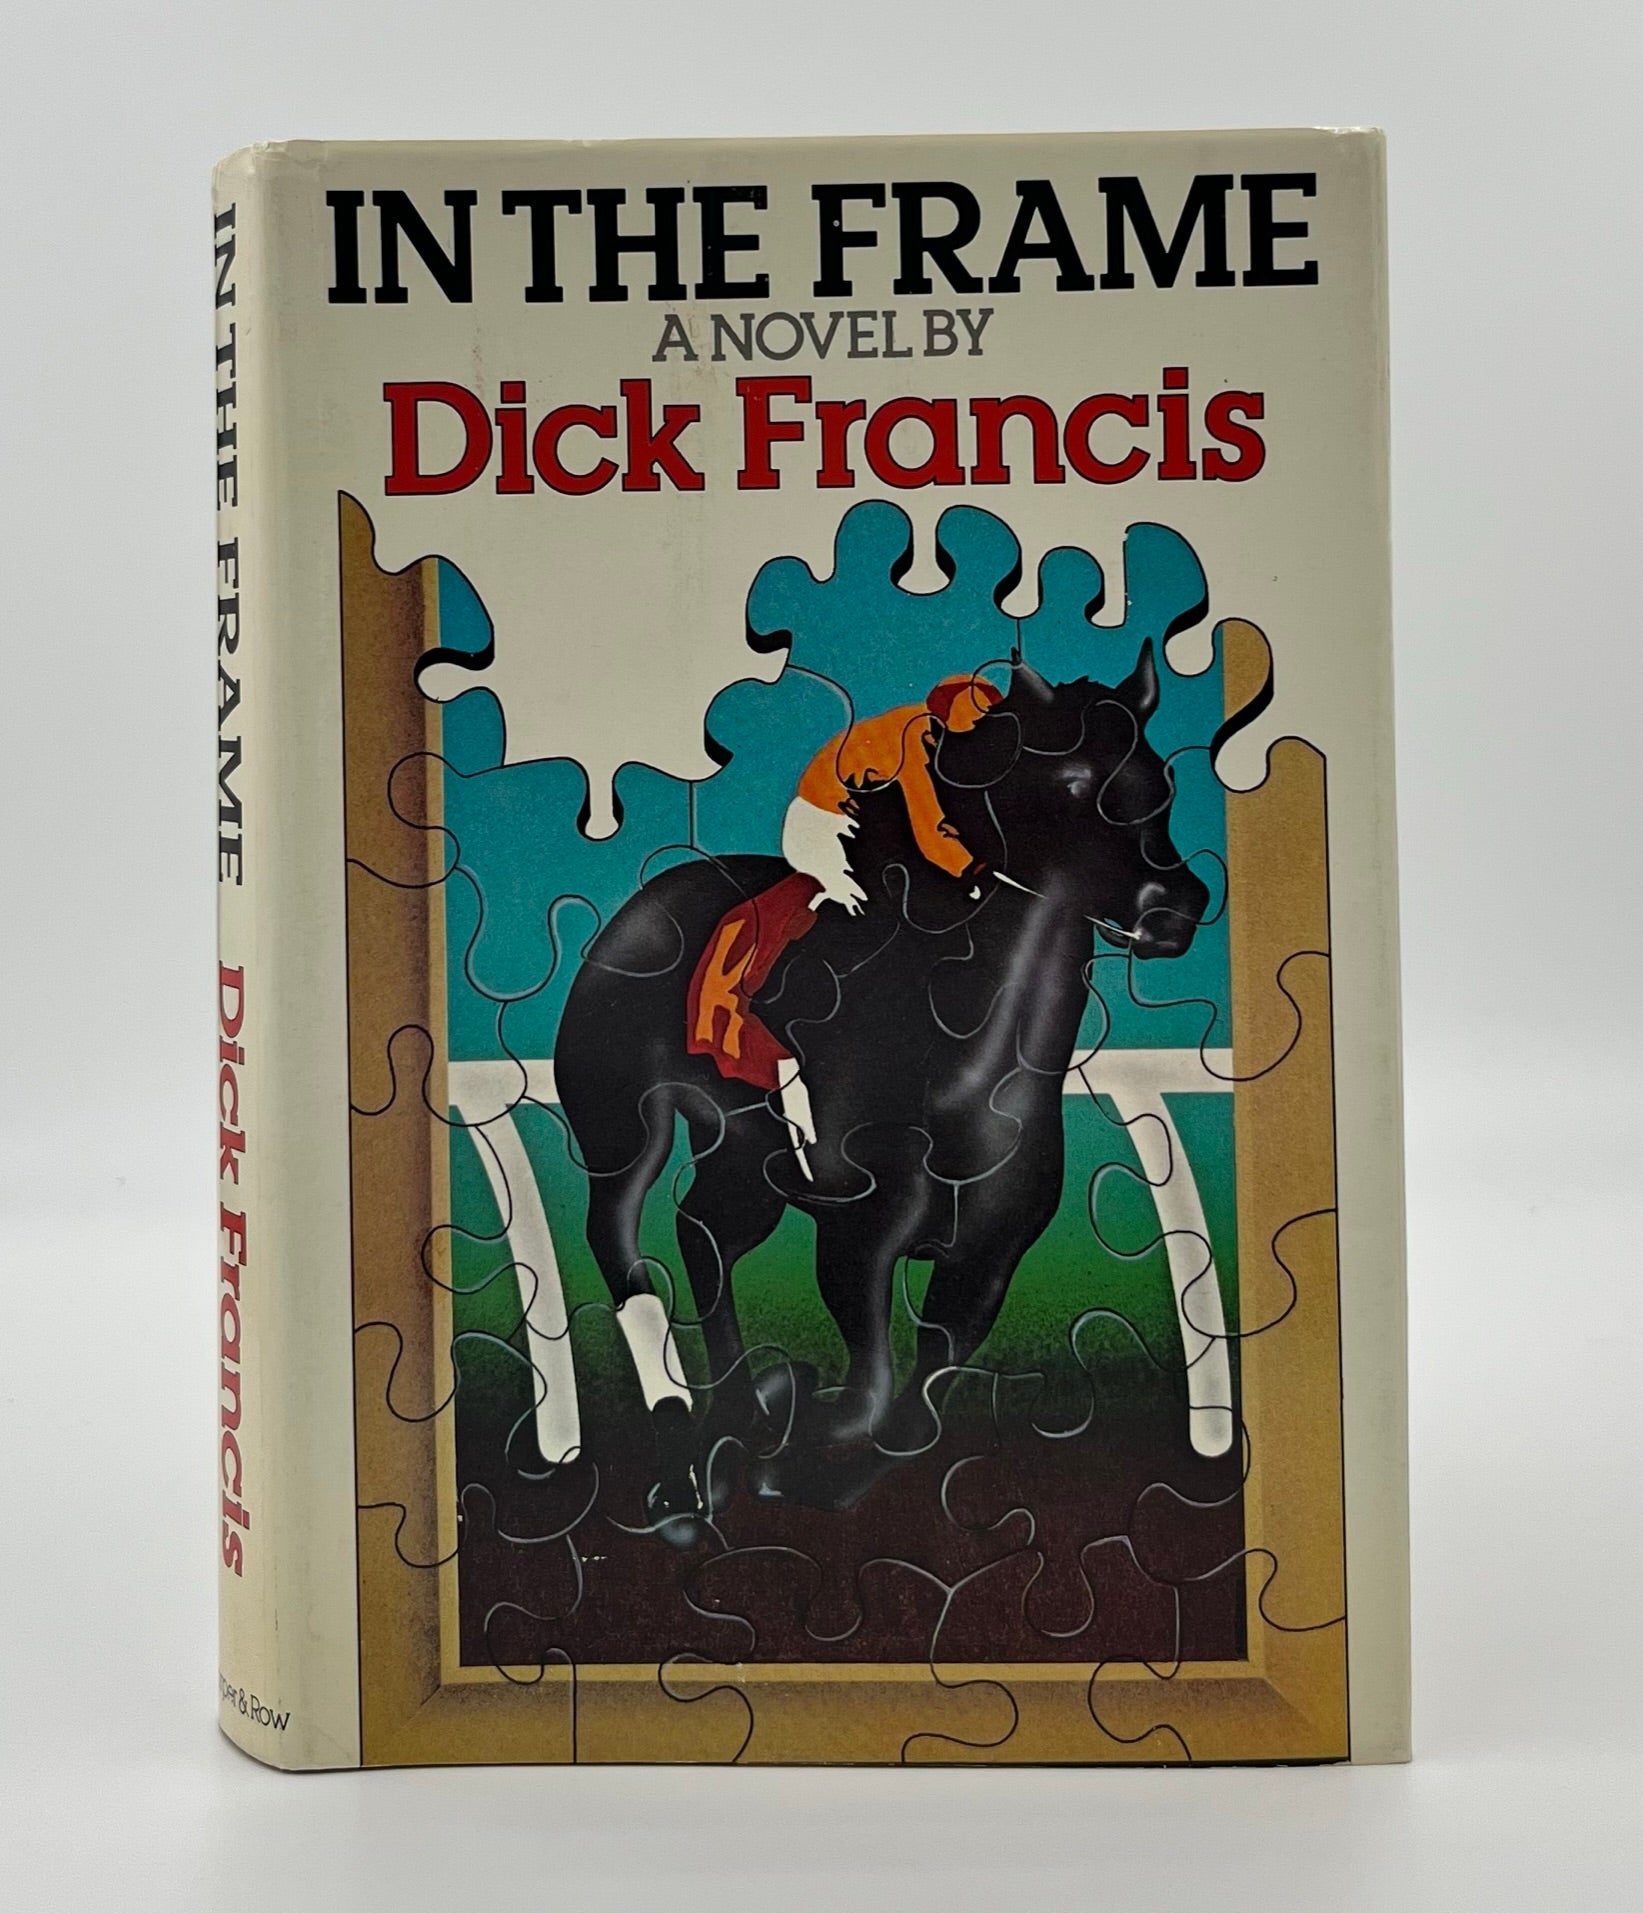 Book #160370 In the Frame 1st US Edition/1st Printing. Dick Francis.